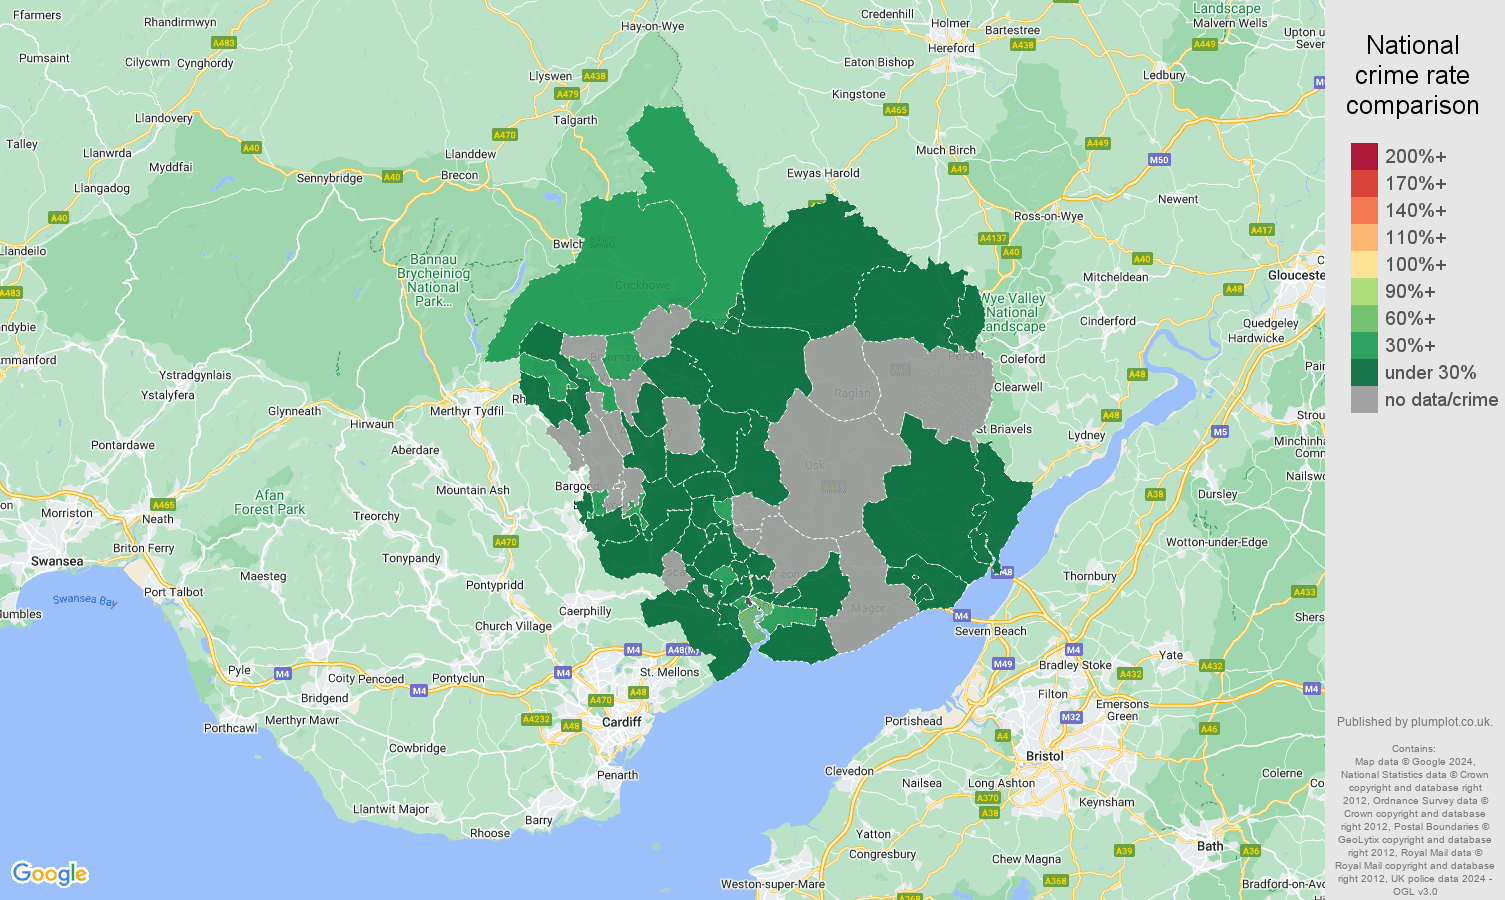 Newport theft from the person crime rate comparison map